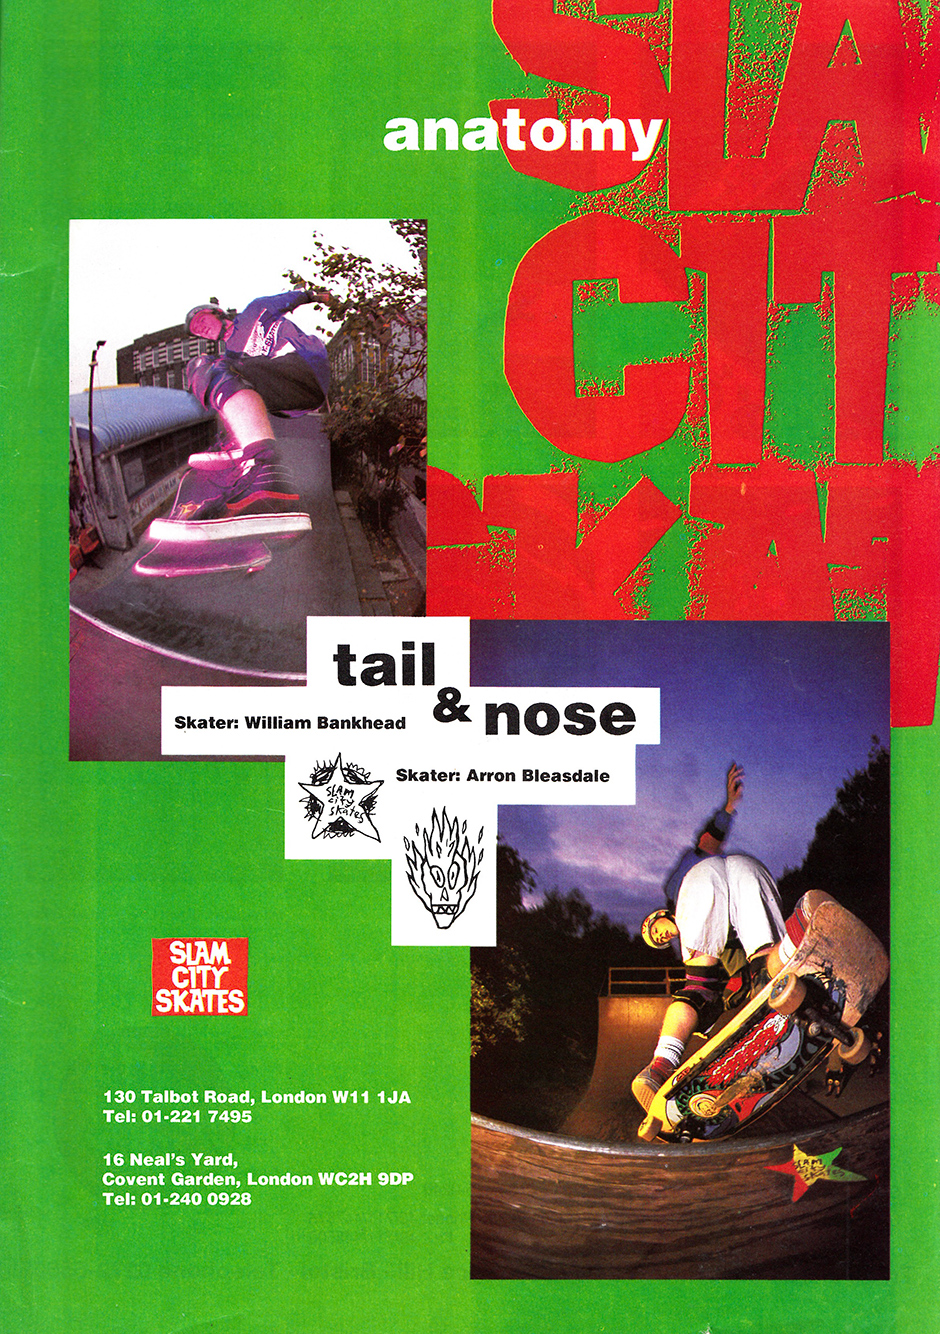 Will Bankhead in the Sk9-Hi, 1990, amongst Tod Swank's star, Savage Pencil's flamehead and Chris Long’s text. Photos by Paul Sunman and layout by Andy Holmes